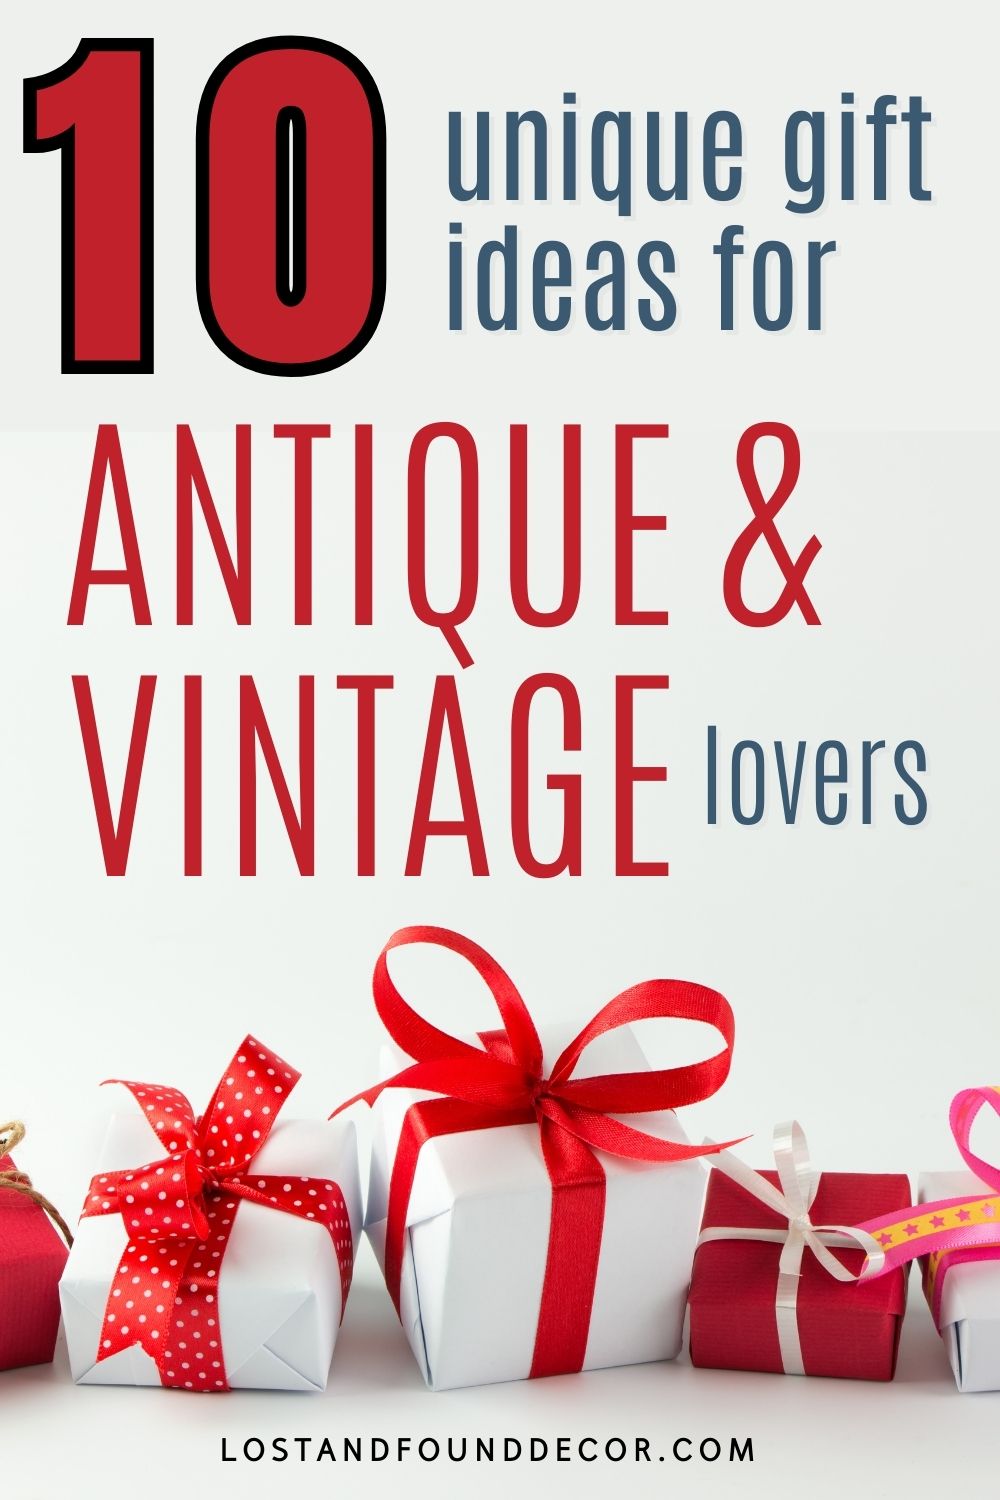 10 ideas for gifts for antique and vintage lovers